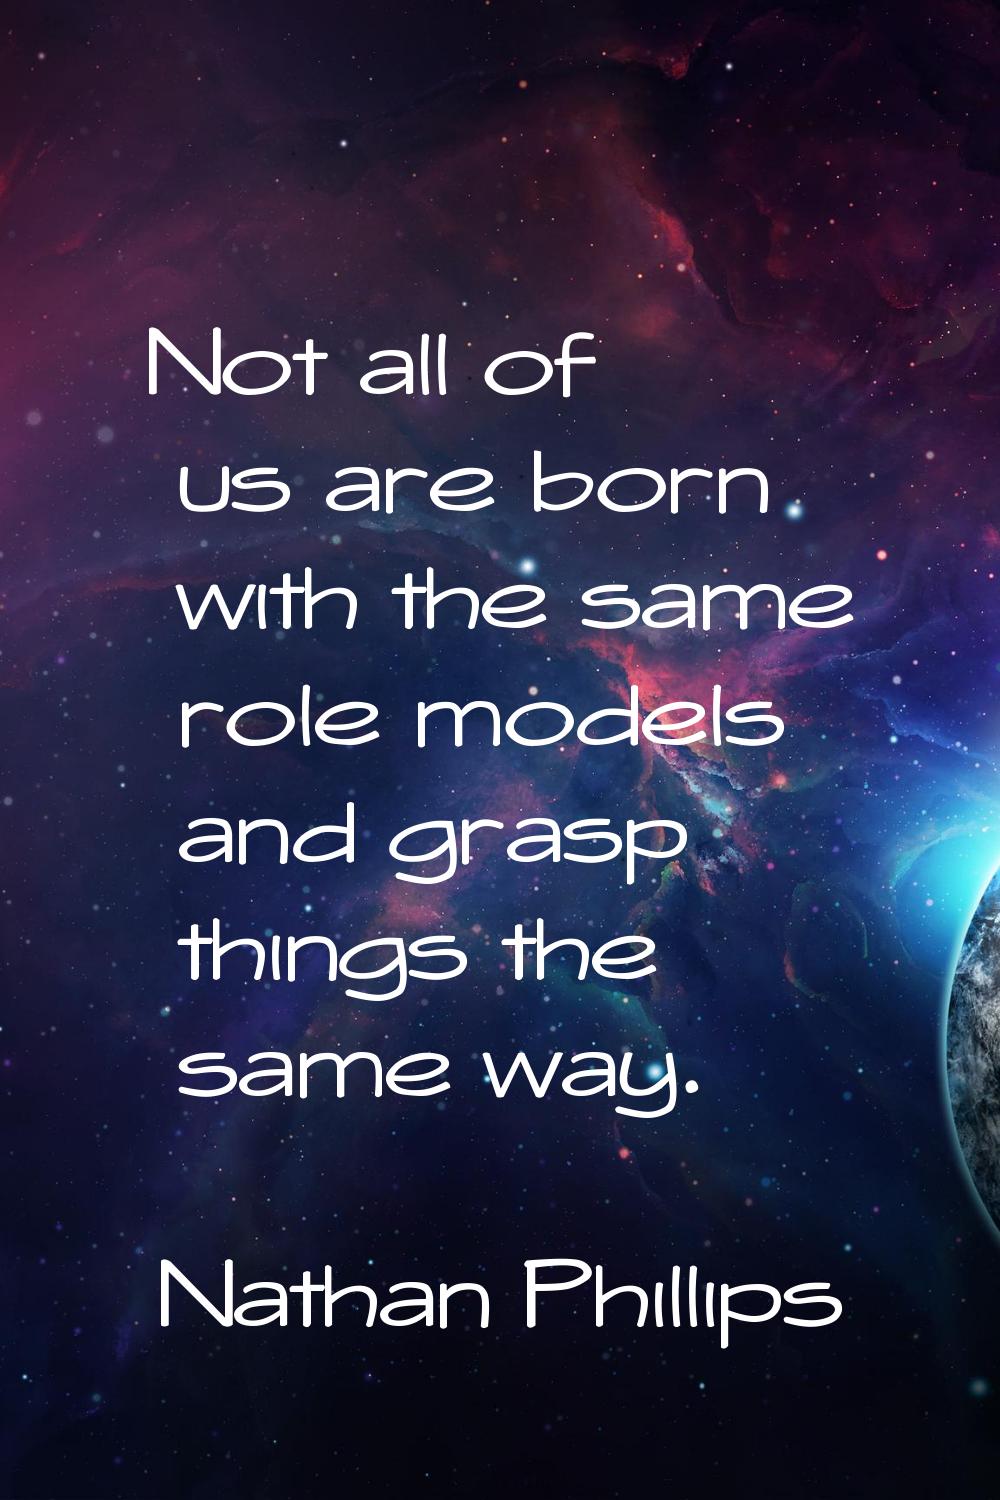 Not all of us are born with the same role models and grasp things the same way.